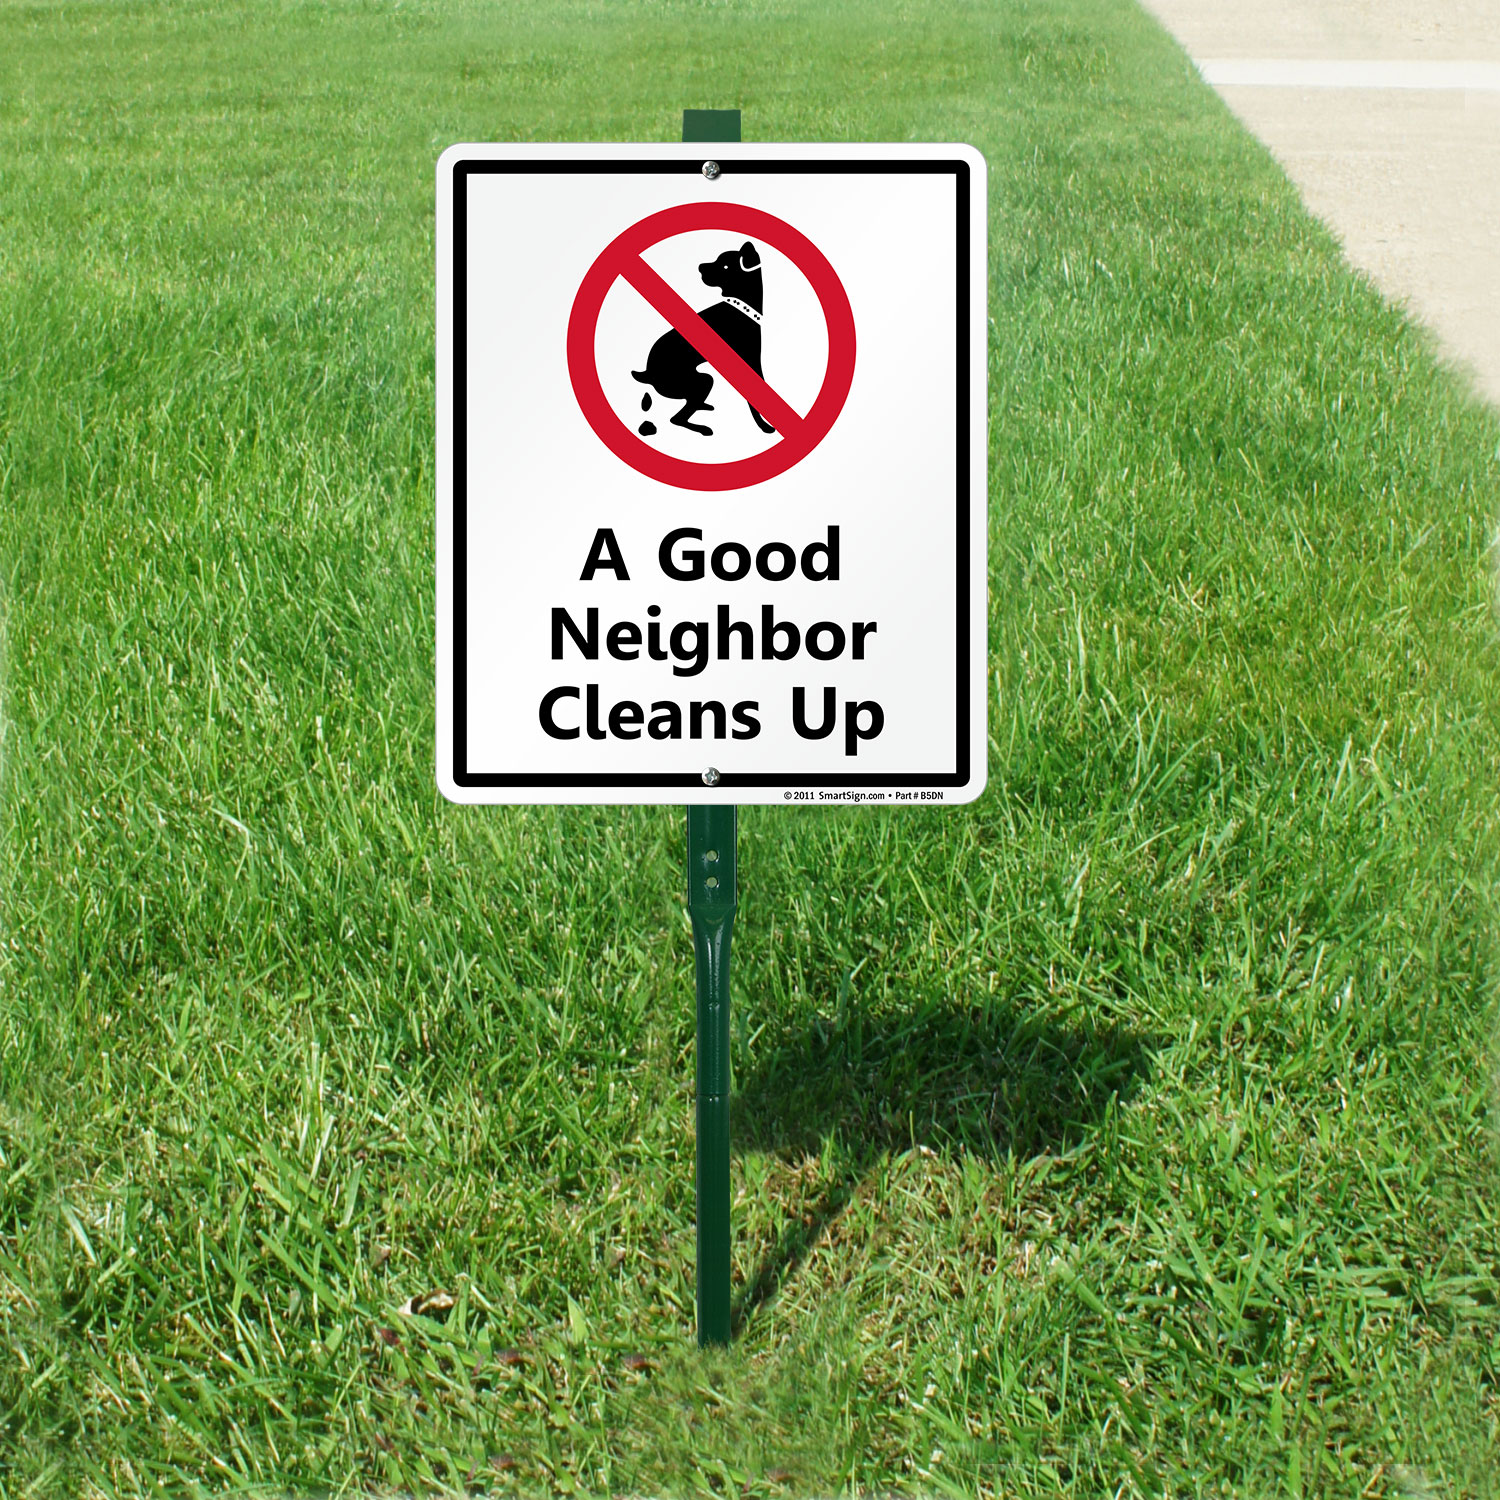 dog-poop-sign-off-leash-area-dogs-must-be-under-control-sign